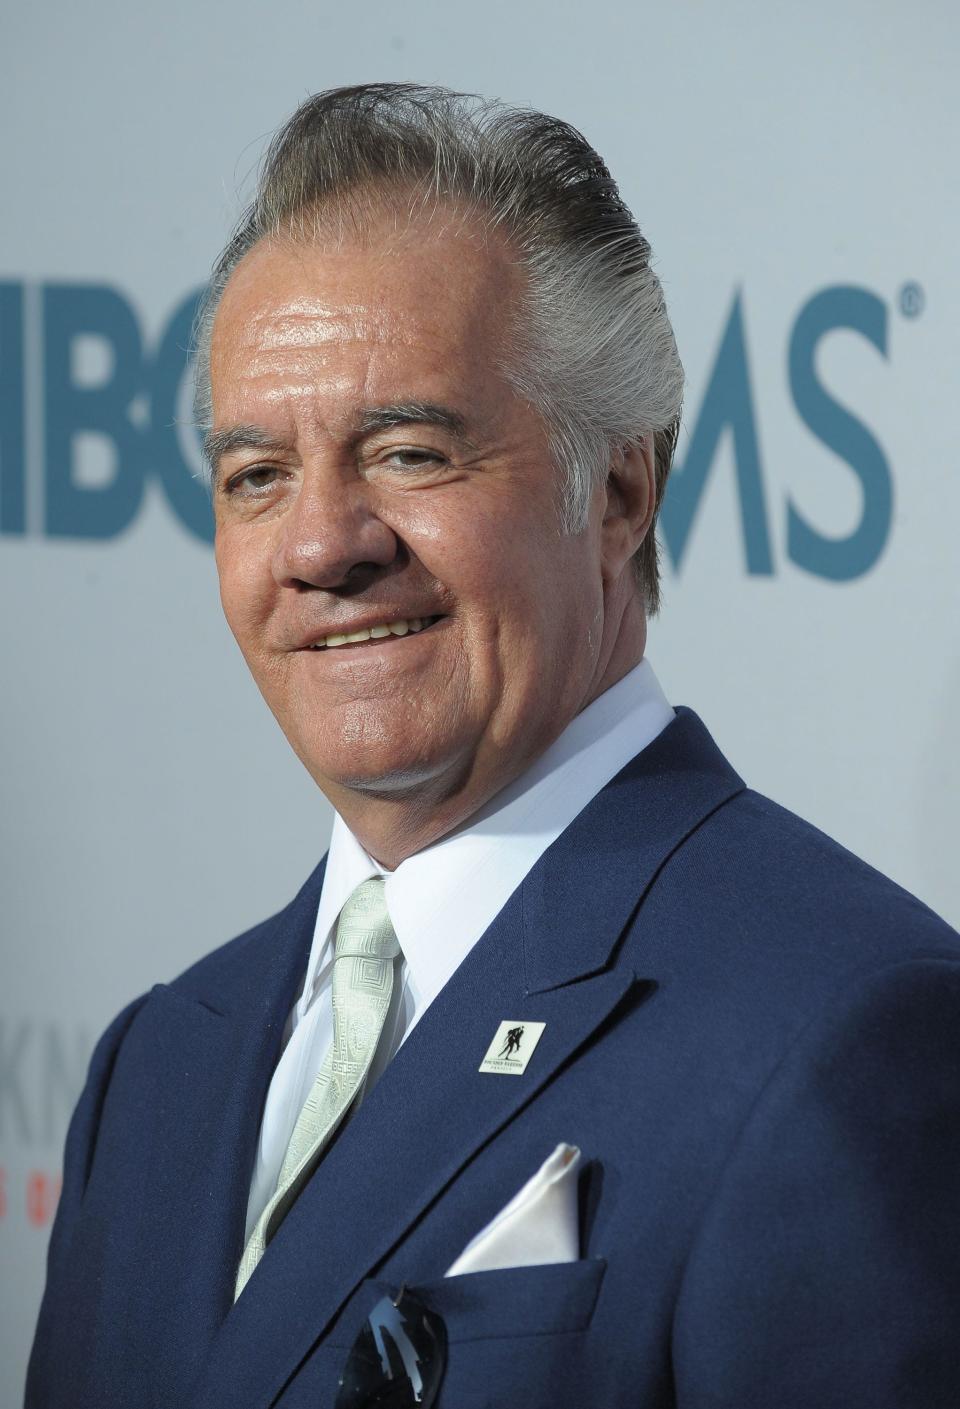 Actor Tony Sirico attends the HBO Films' "You Don't Know Jack" premiere at Ziegfeld Theatre on April 14, 2010, in New York City.